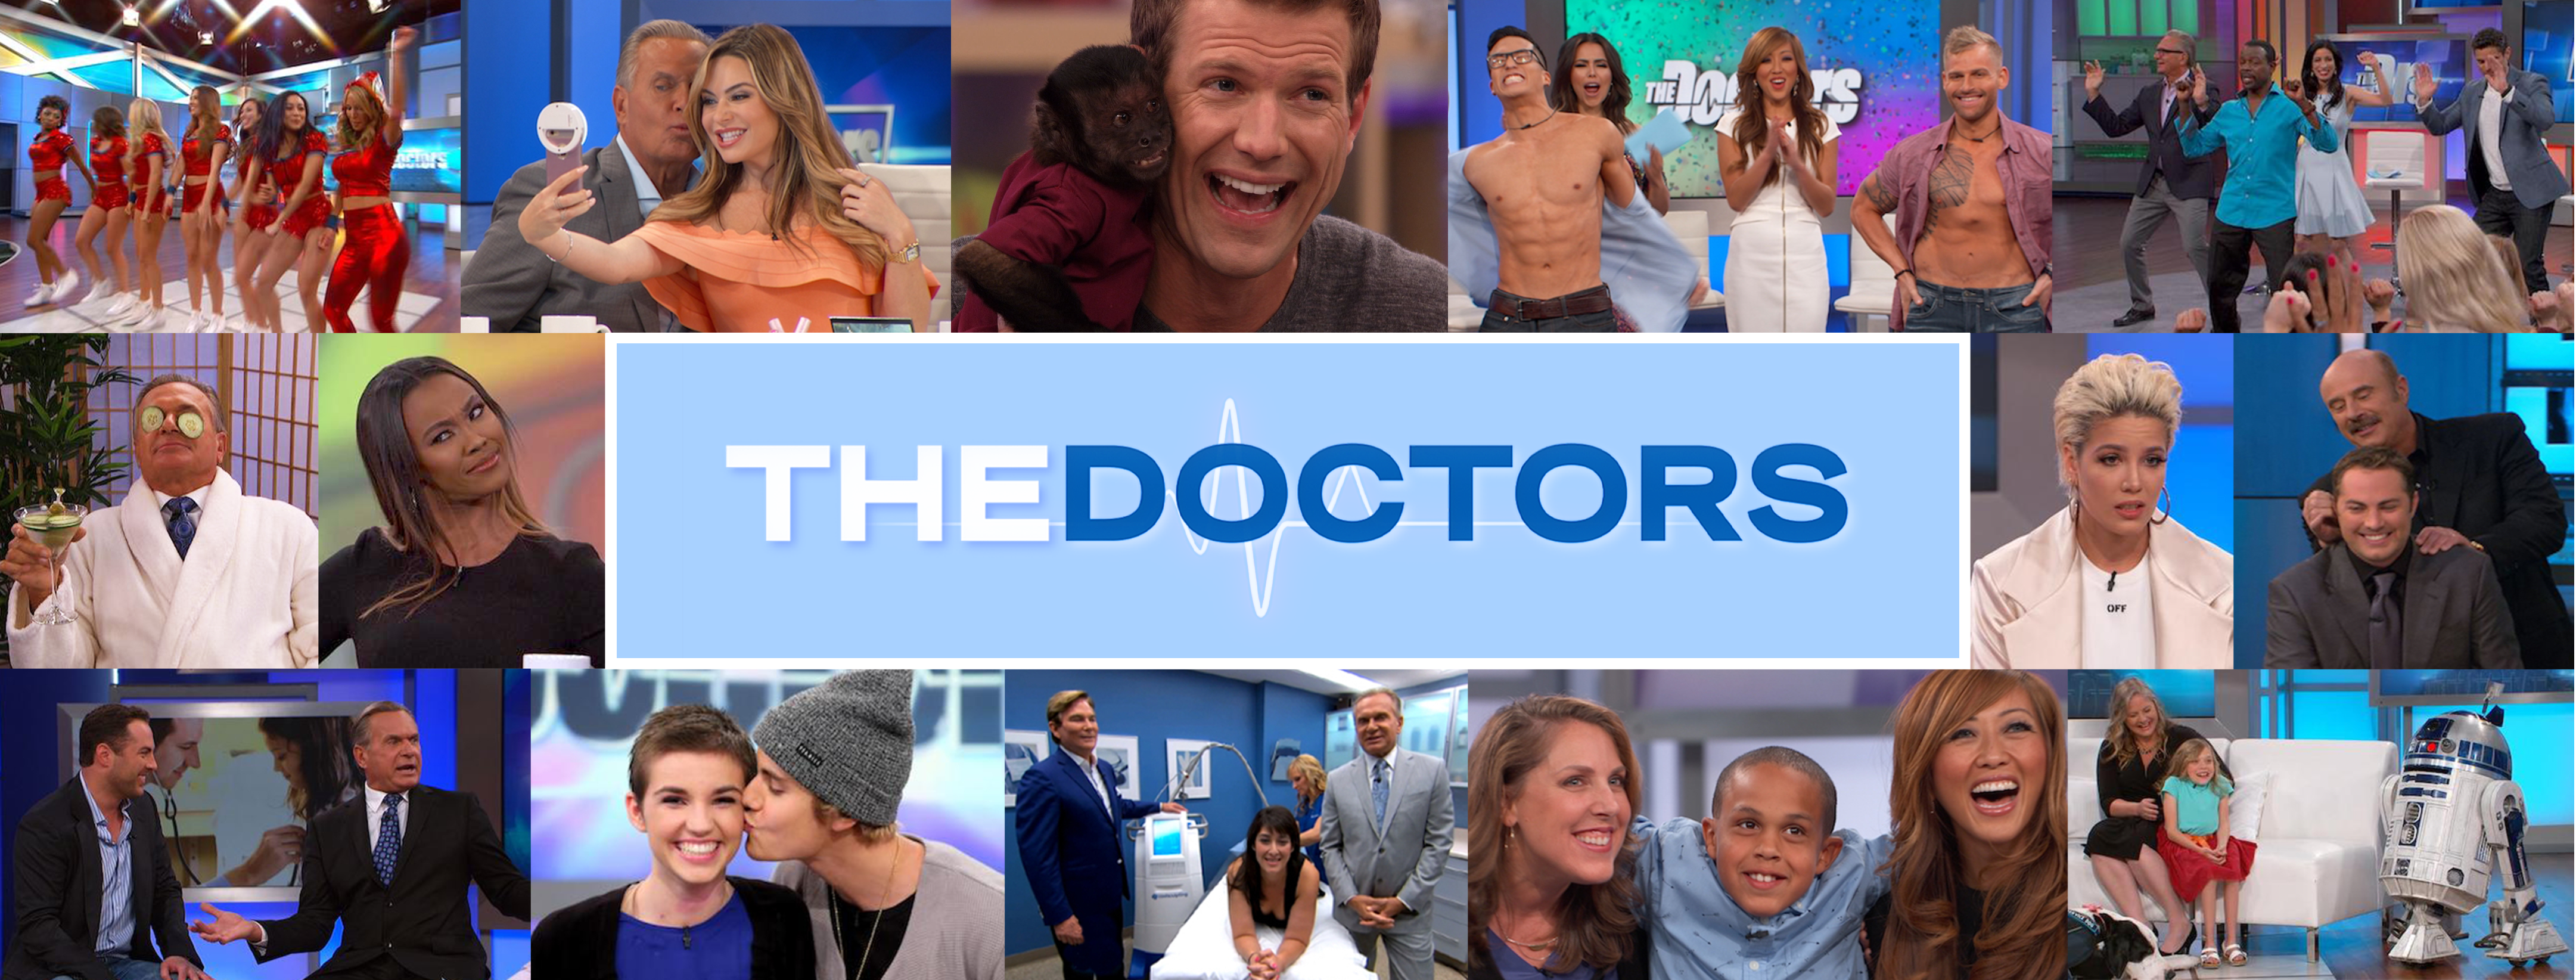 Enter for Your Chance to Win a Walmart Gift Card | The Doctors TV Show